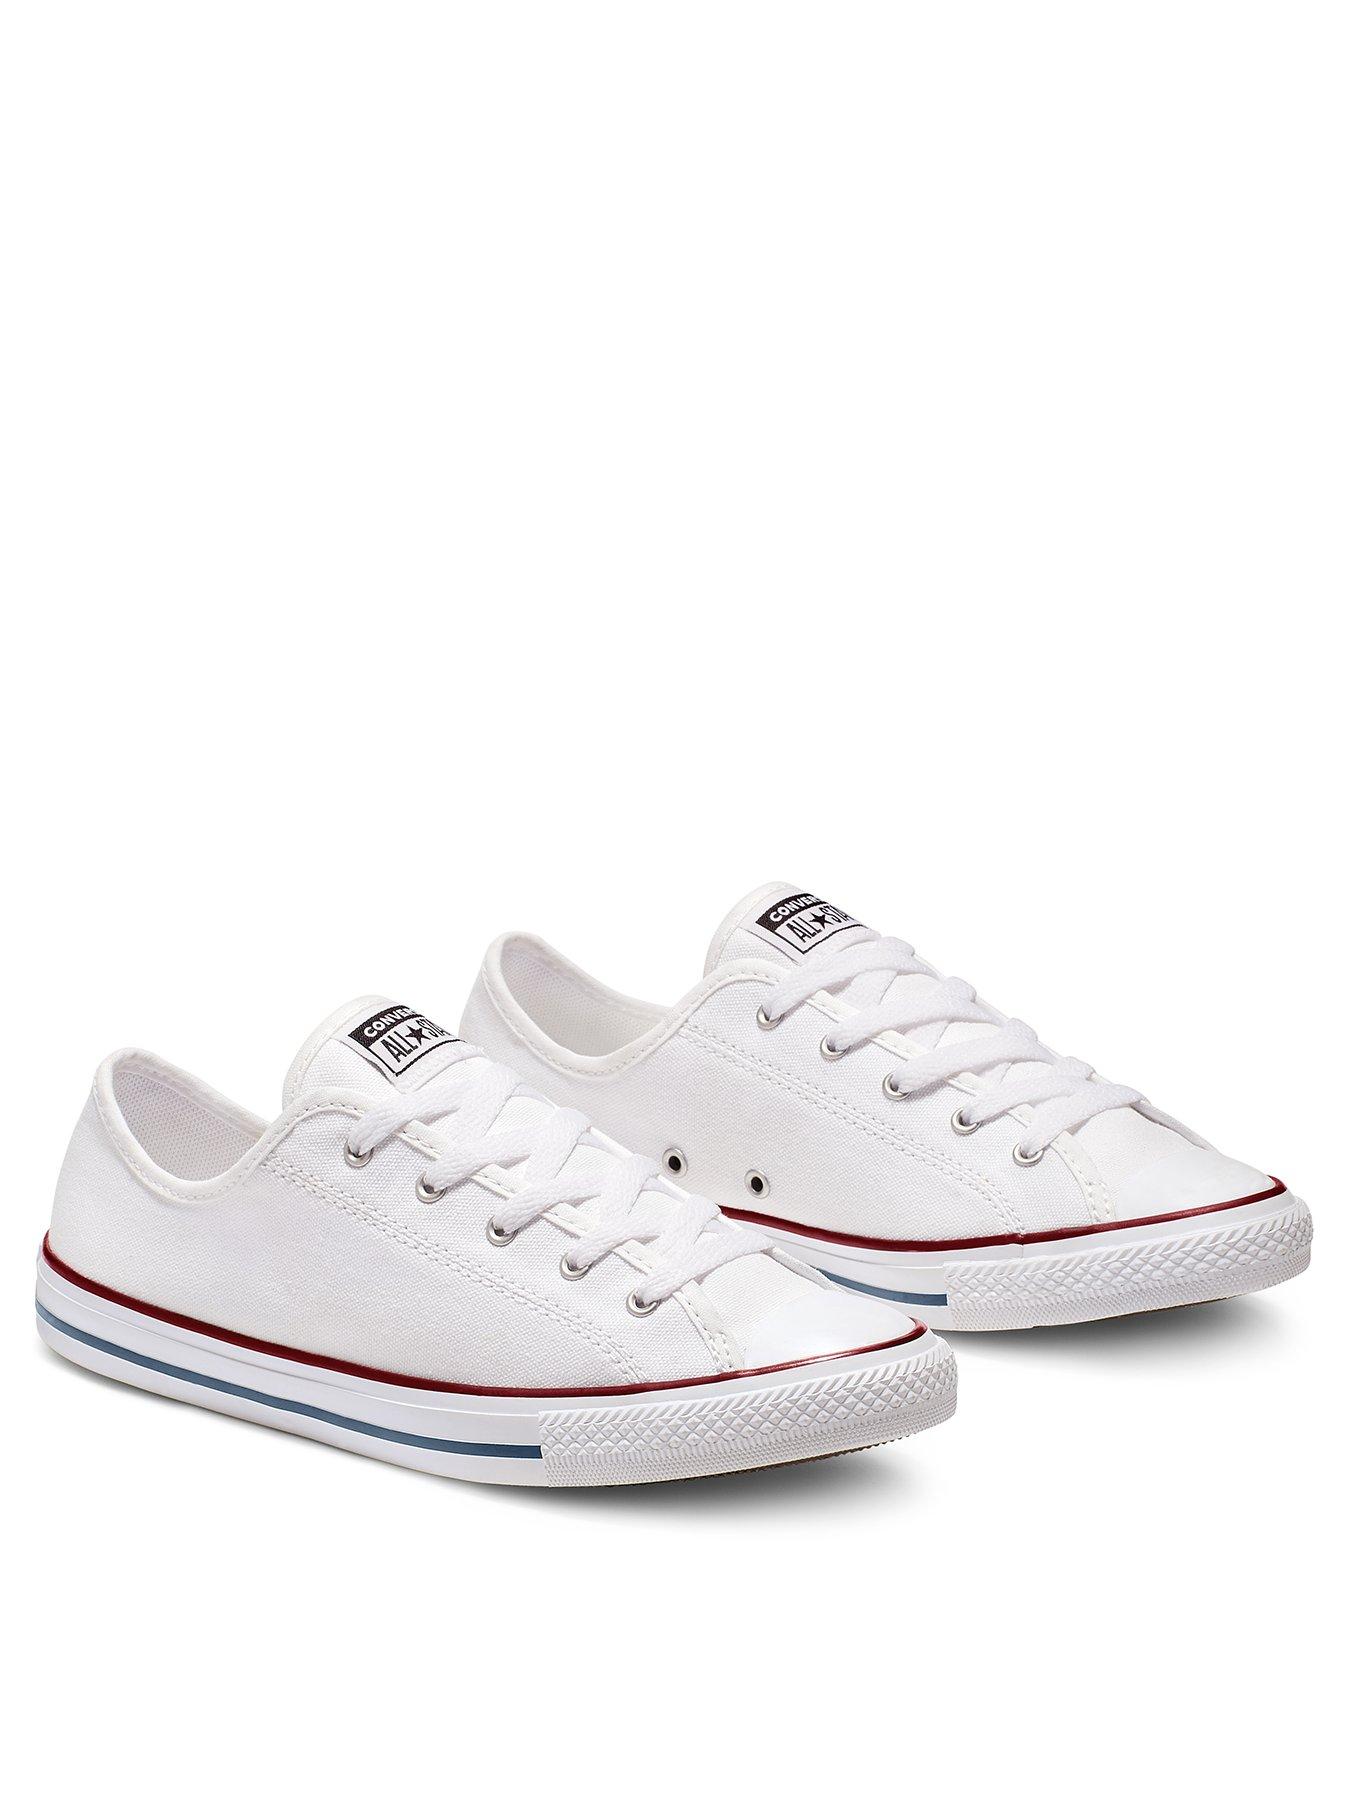 mosterd Ijver Plagen Converse Chuck Taylor All Star Dainty Canvas Ox Plimsolls - White |  very.co.uk